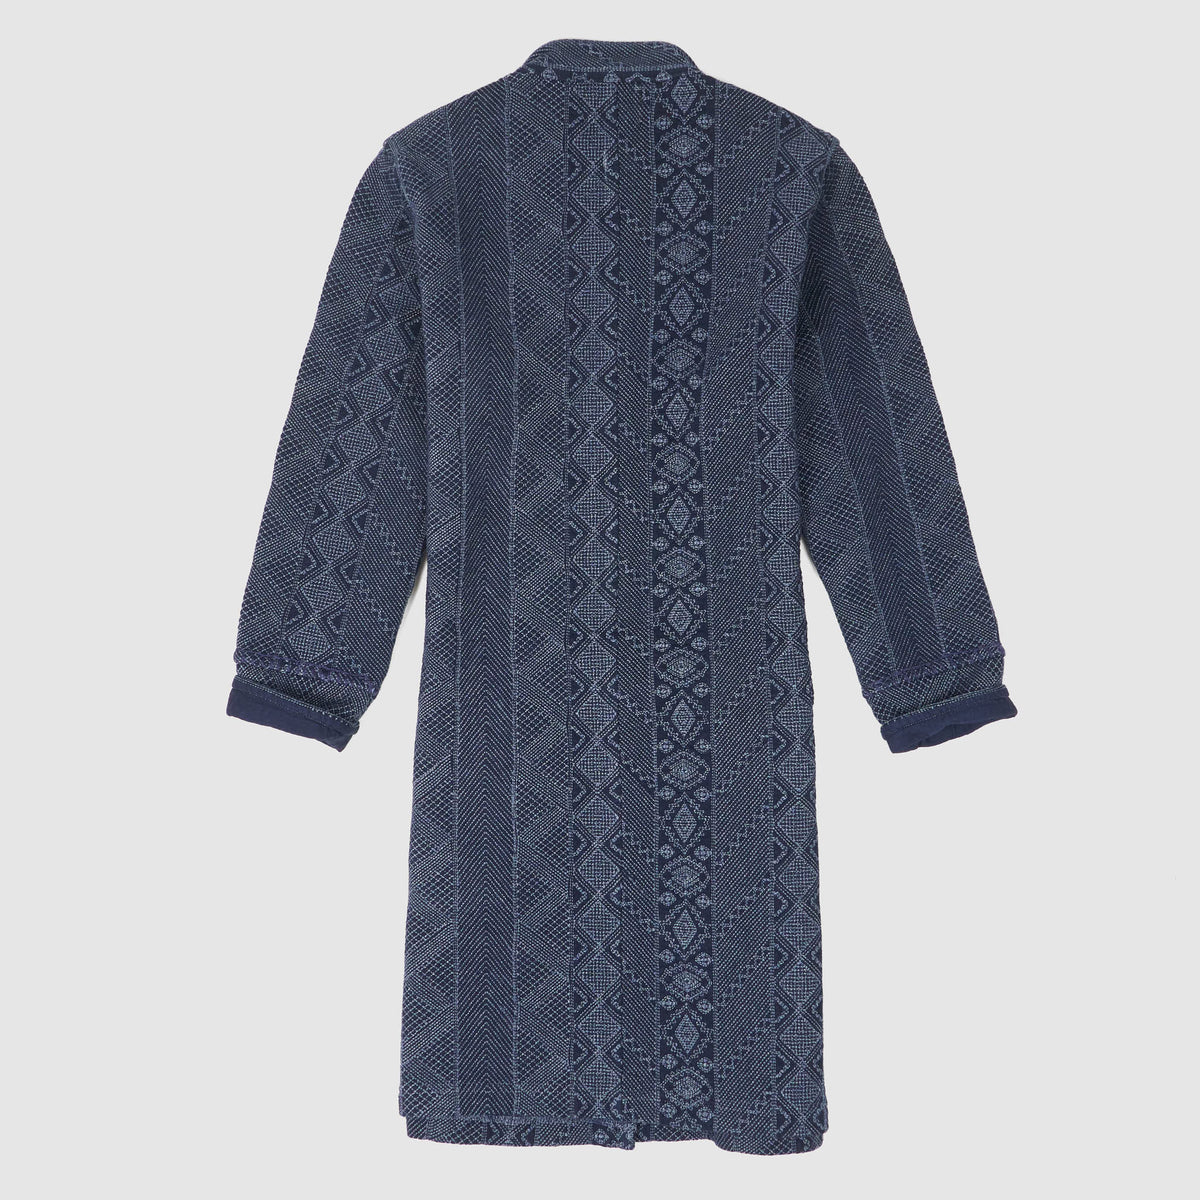 Double RL Ladies Quilted Indigo Cotton Jersey Duster Coat